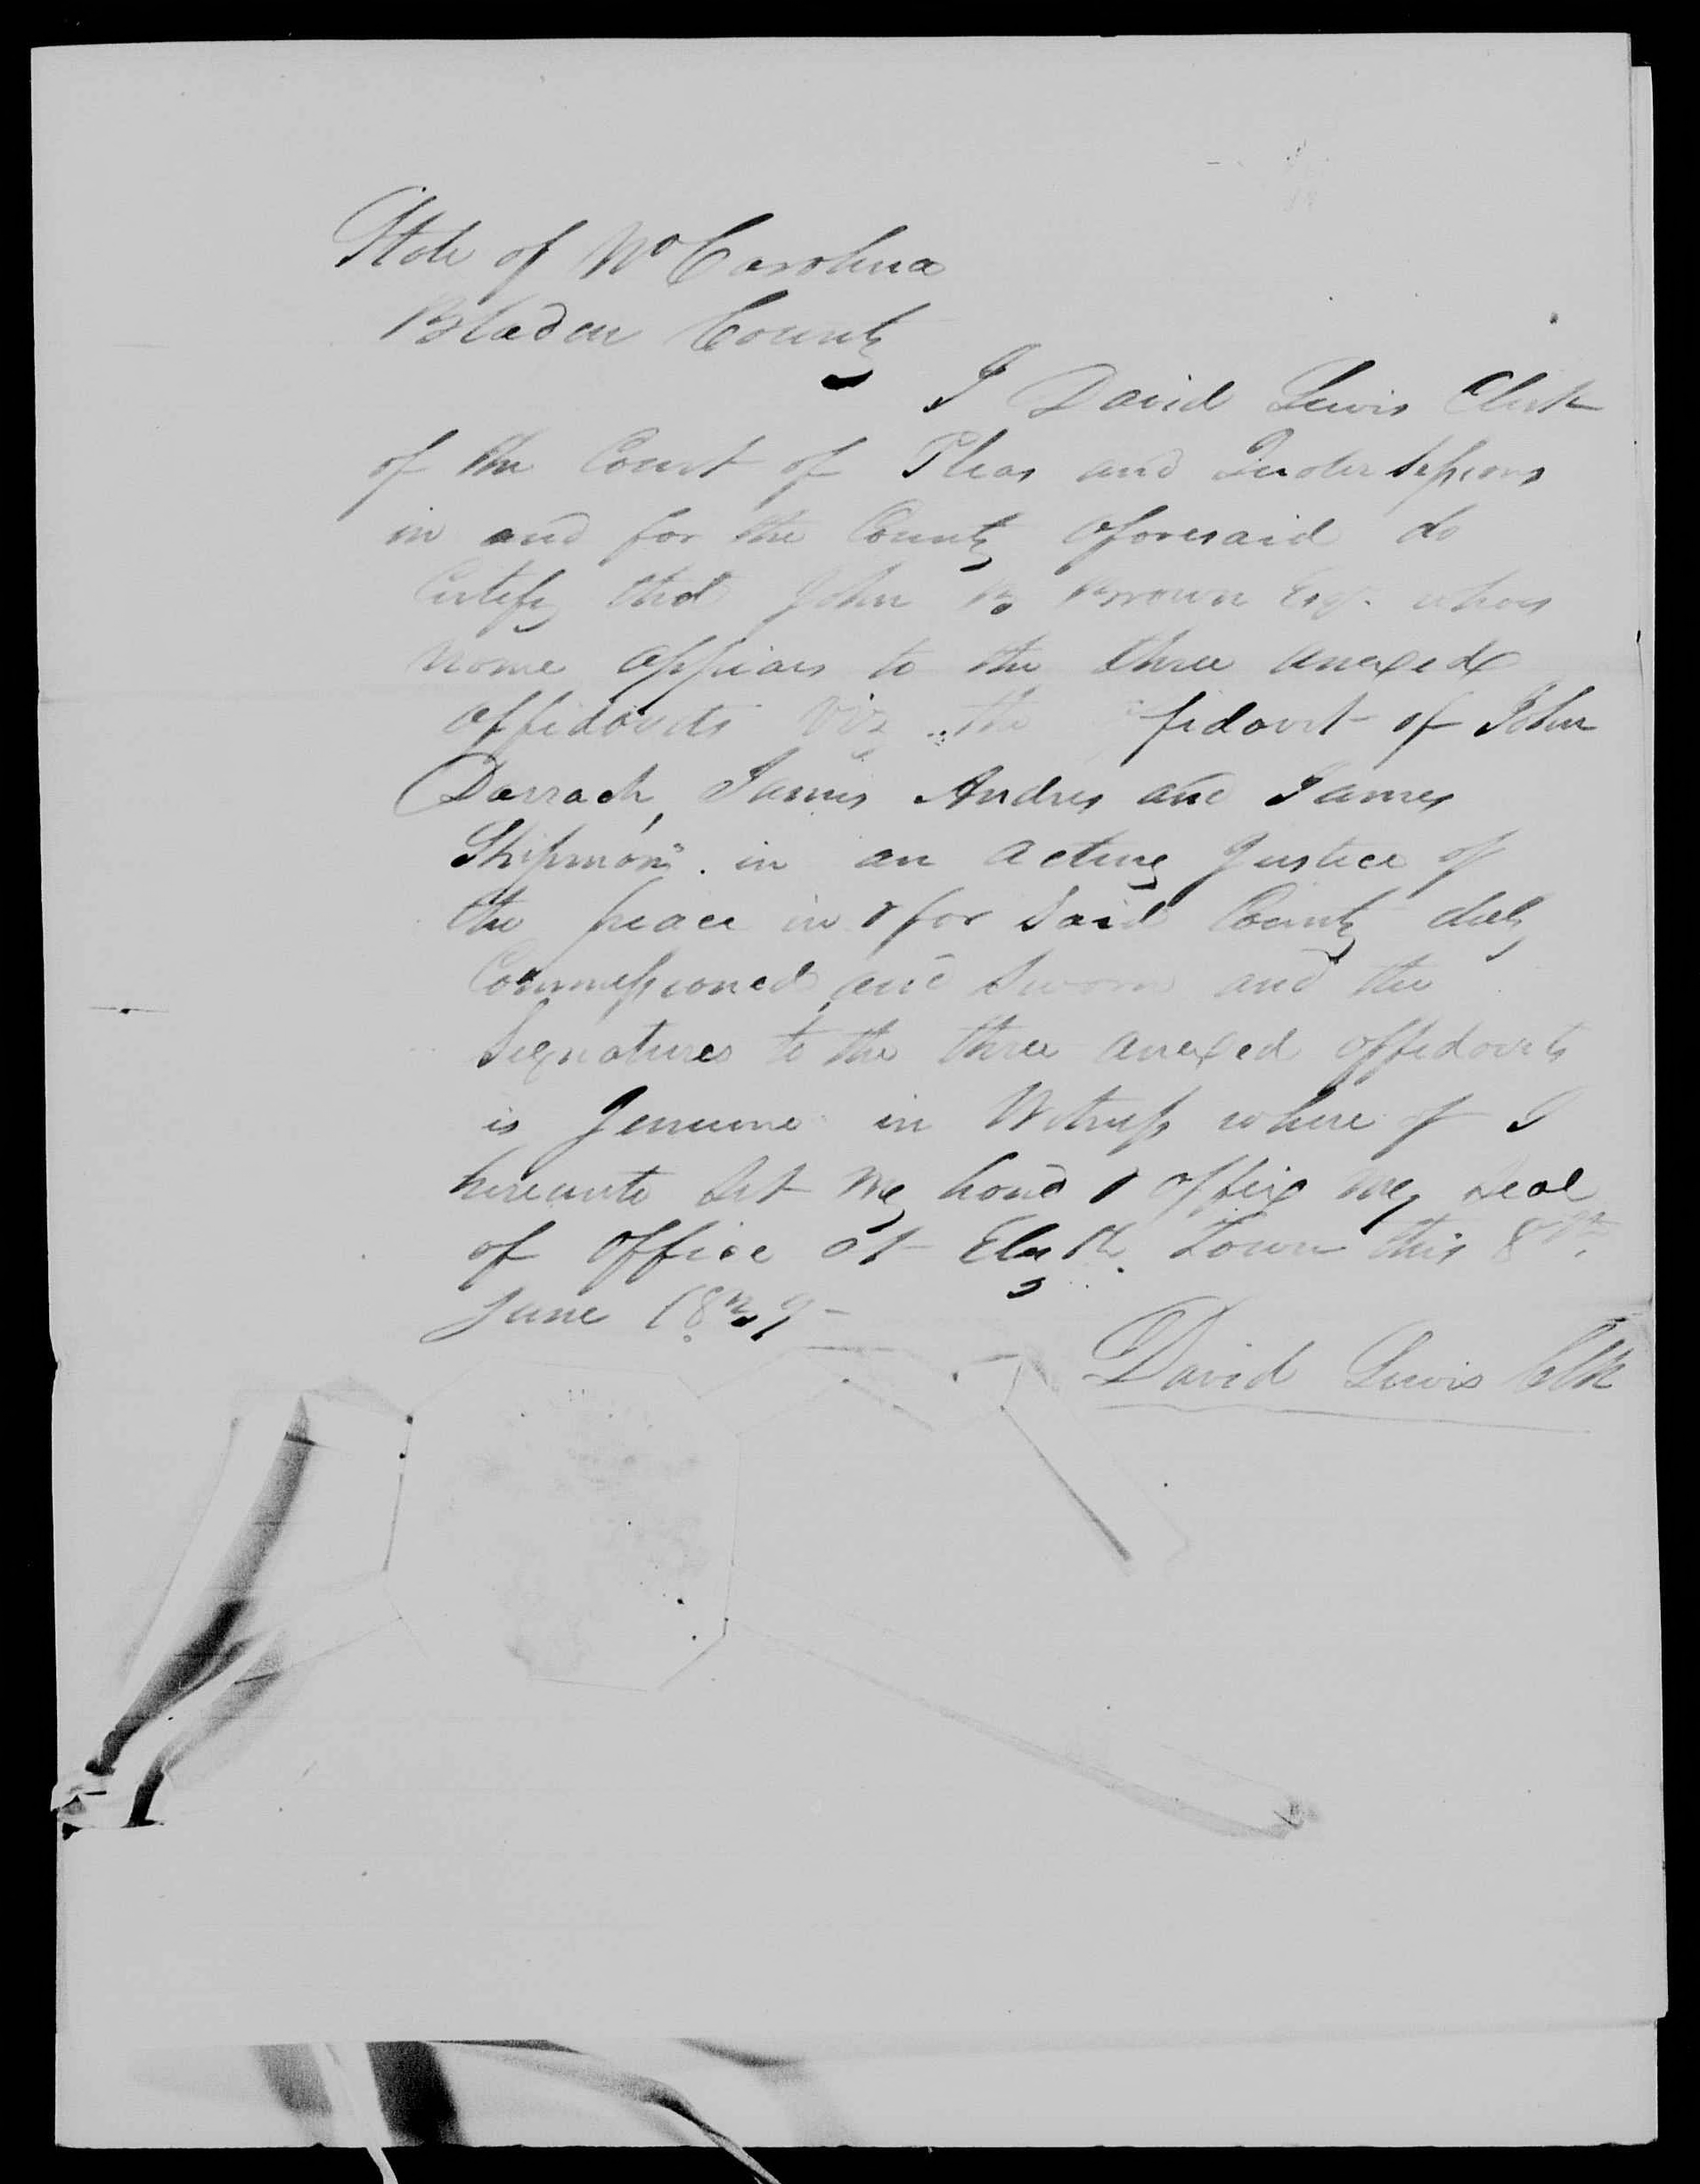 Affidavit of James Shipman (amended) in support of a Pension Claim for Lucy Brown, 8 June 1839, page 3